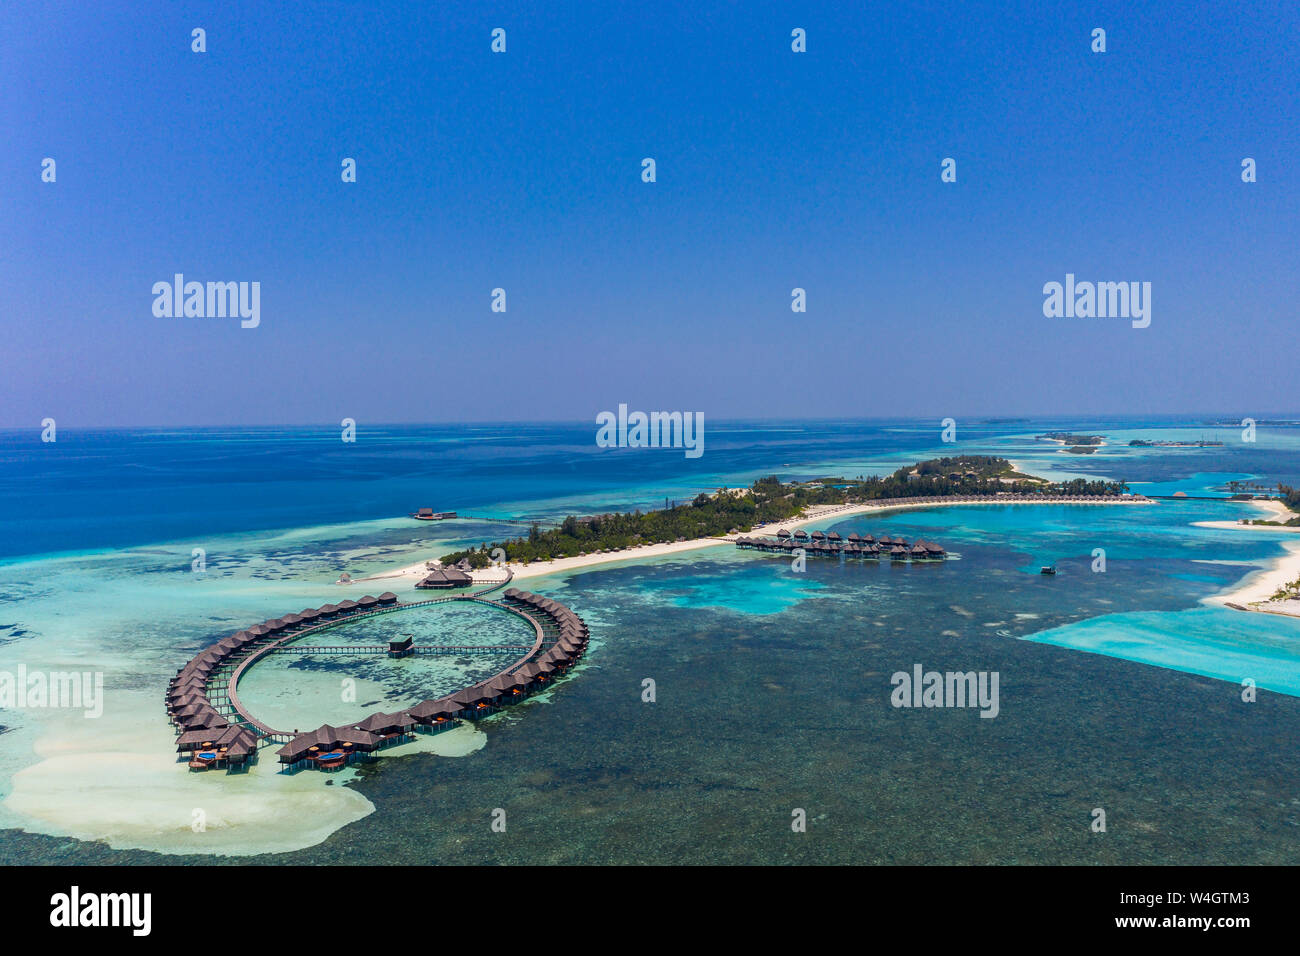 Aerial view over Olhuveli with water bungalows, South Male Atoll, Maldives Stock Photo